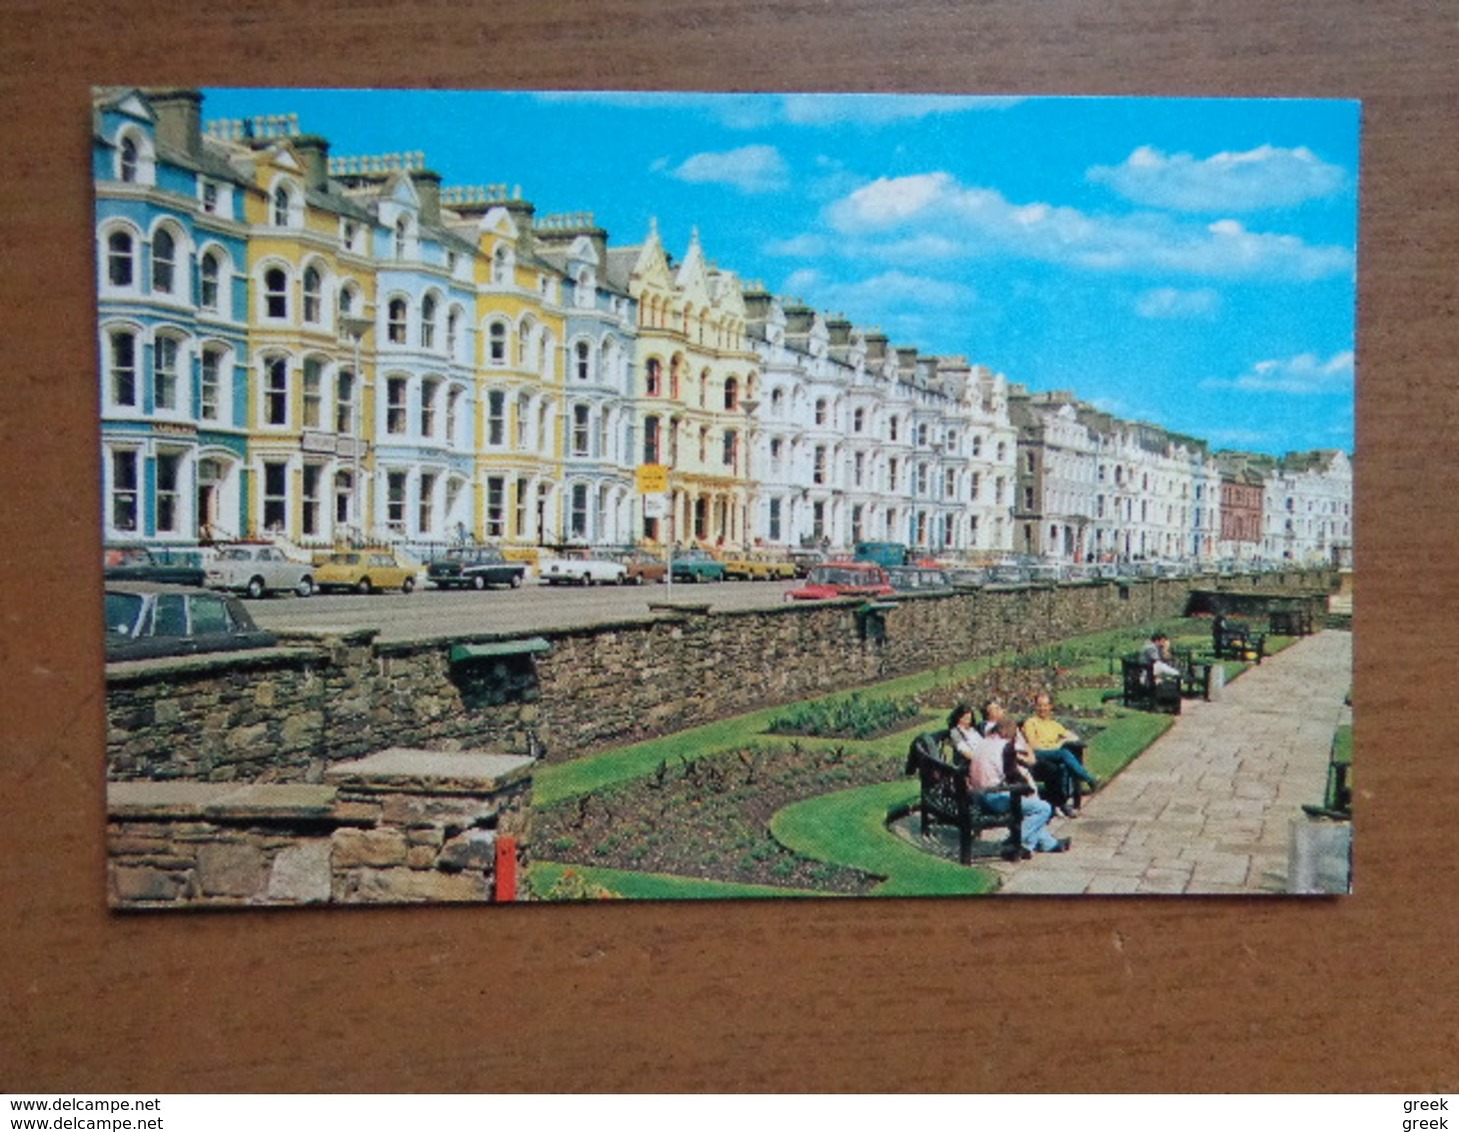 28 cards of ISLE OF MAN (see pictures)